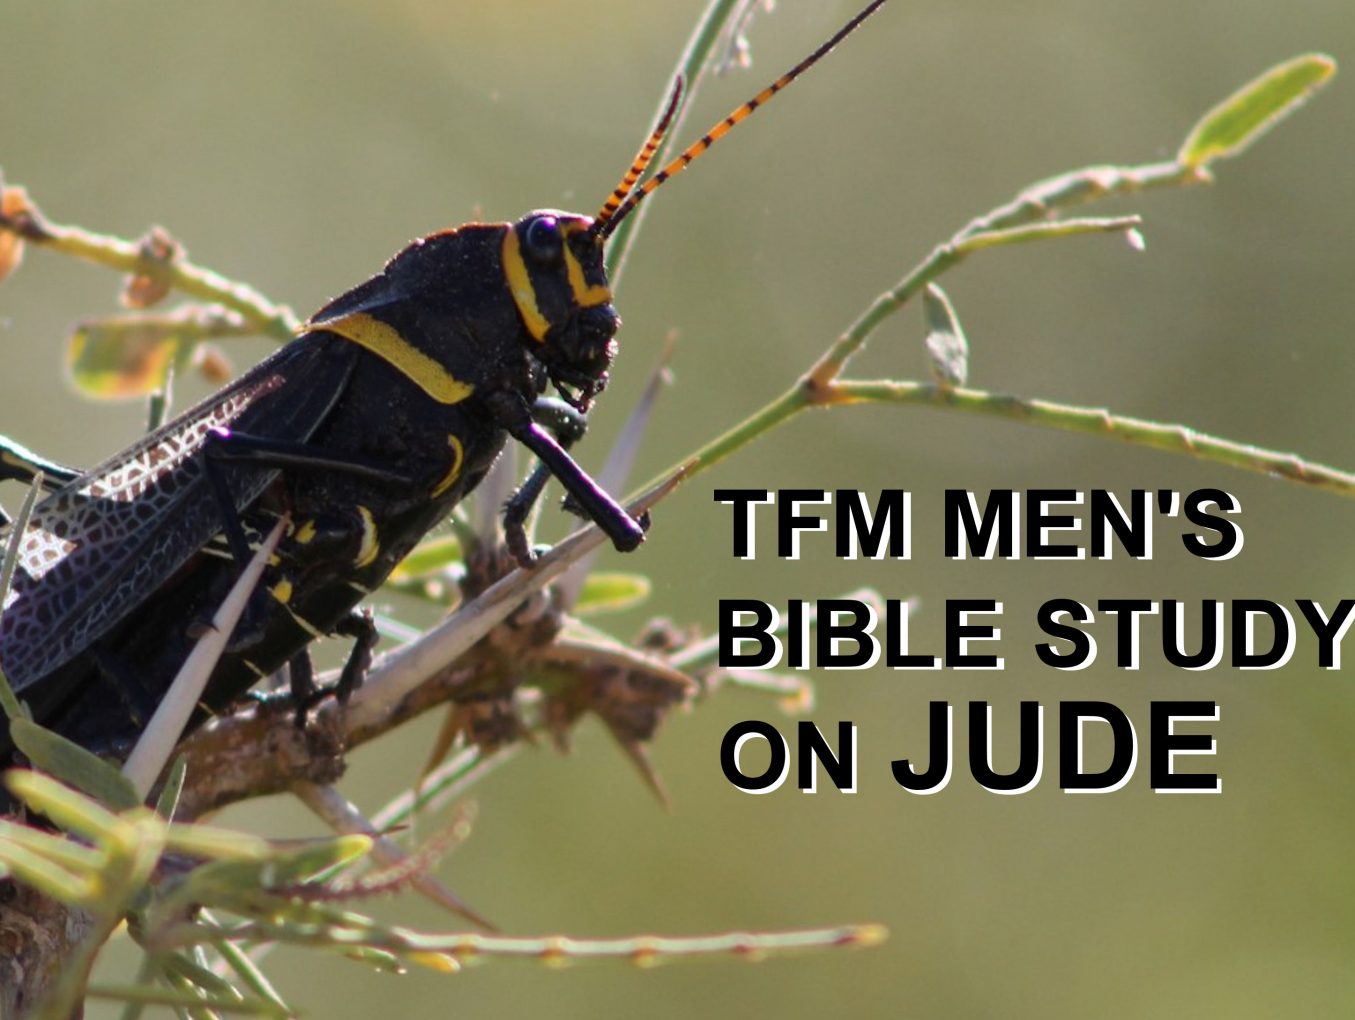 Men's Bible Study on JUDE (2014-04-08 to 2014-04-15)